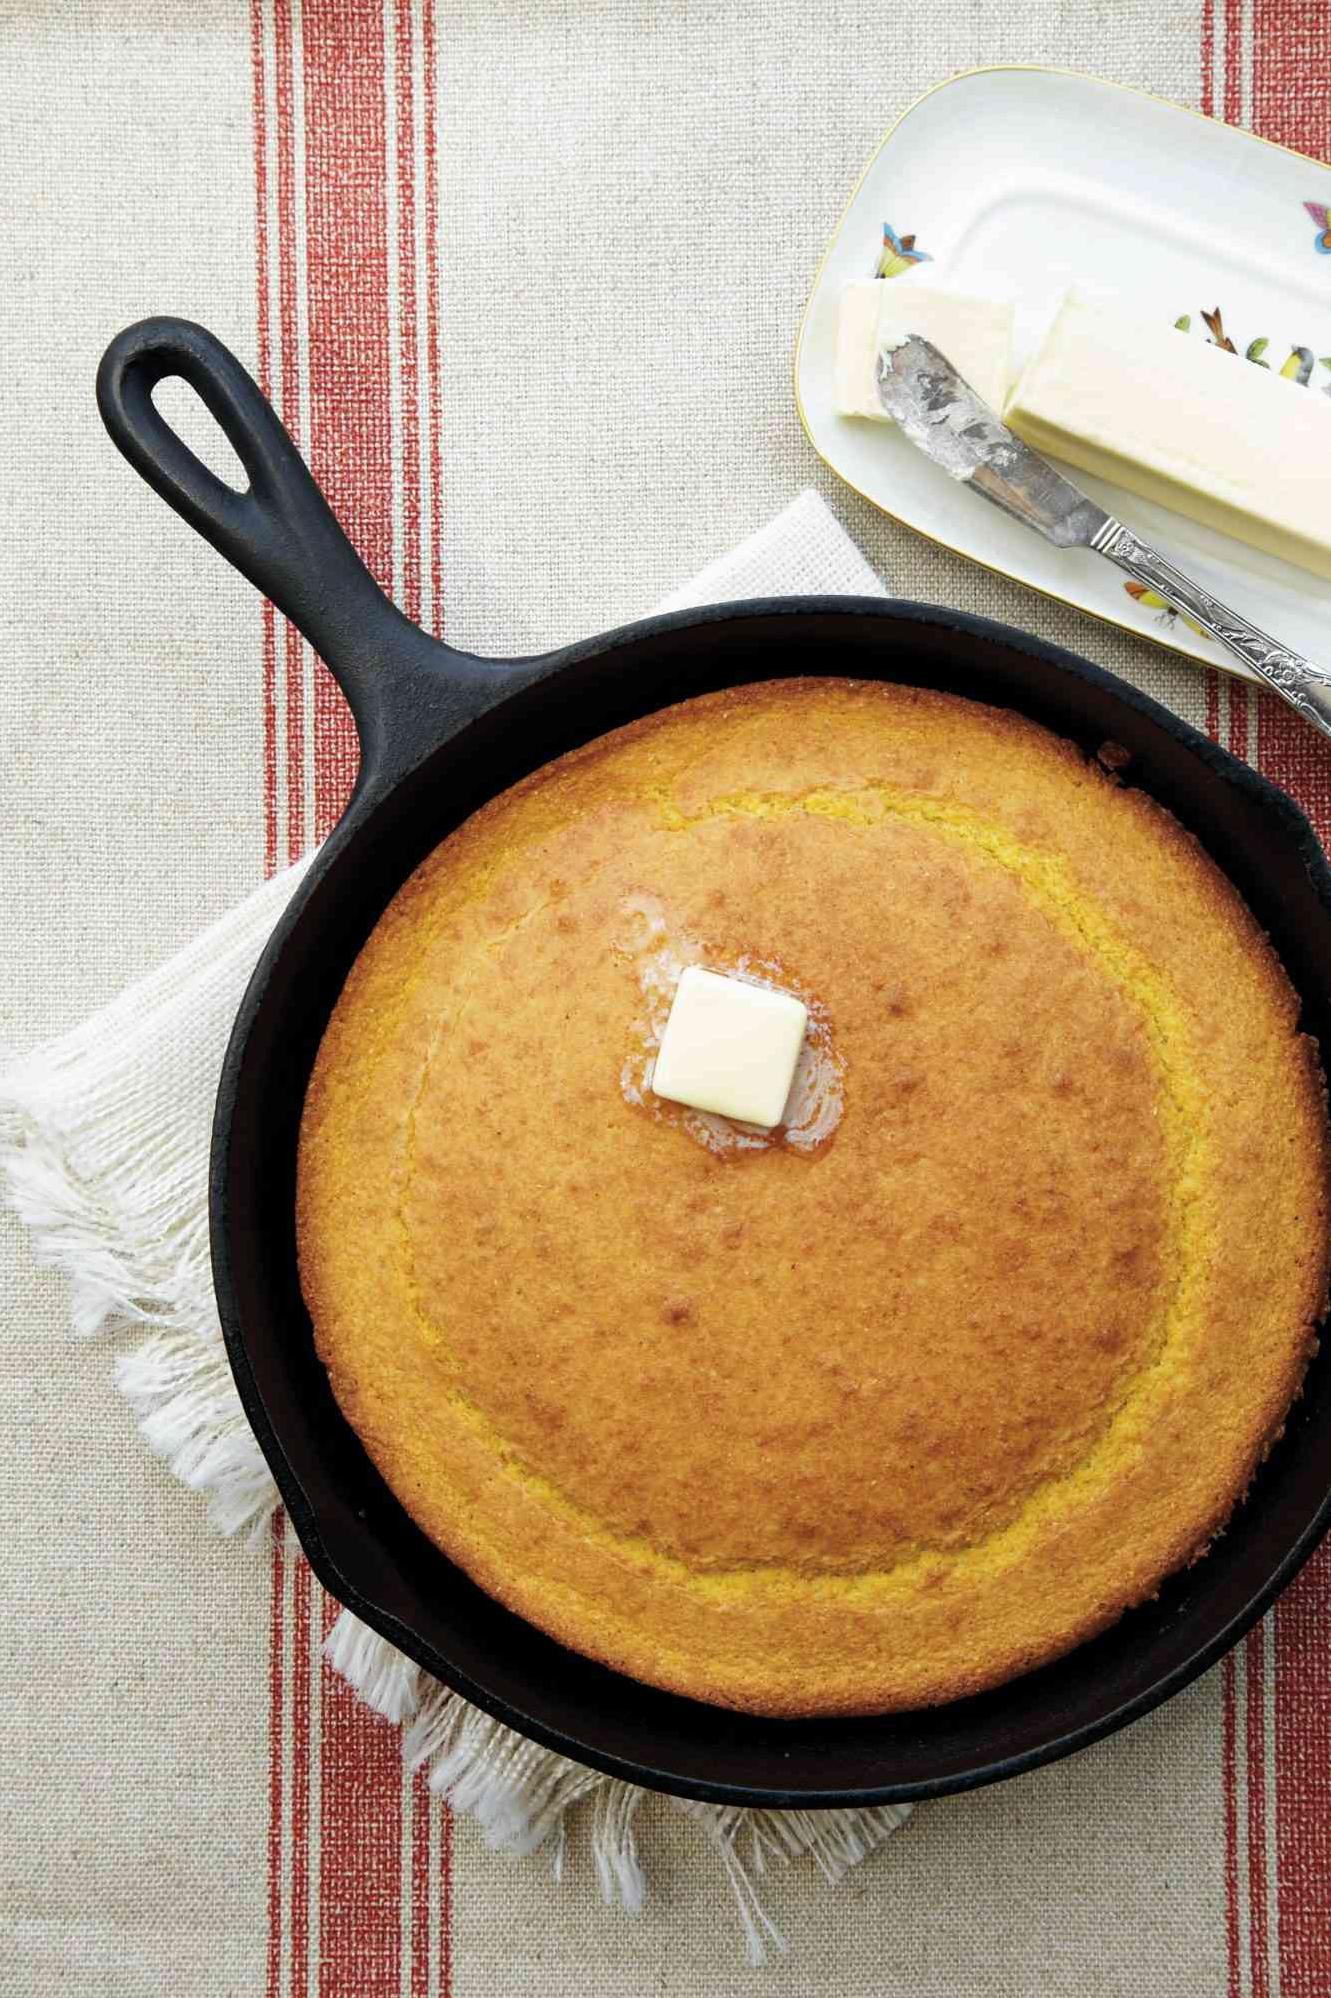  This cornbread is so easy to make, you'll want to whip up a batch every night!